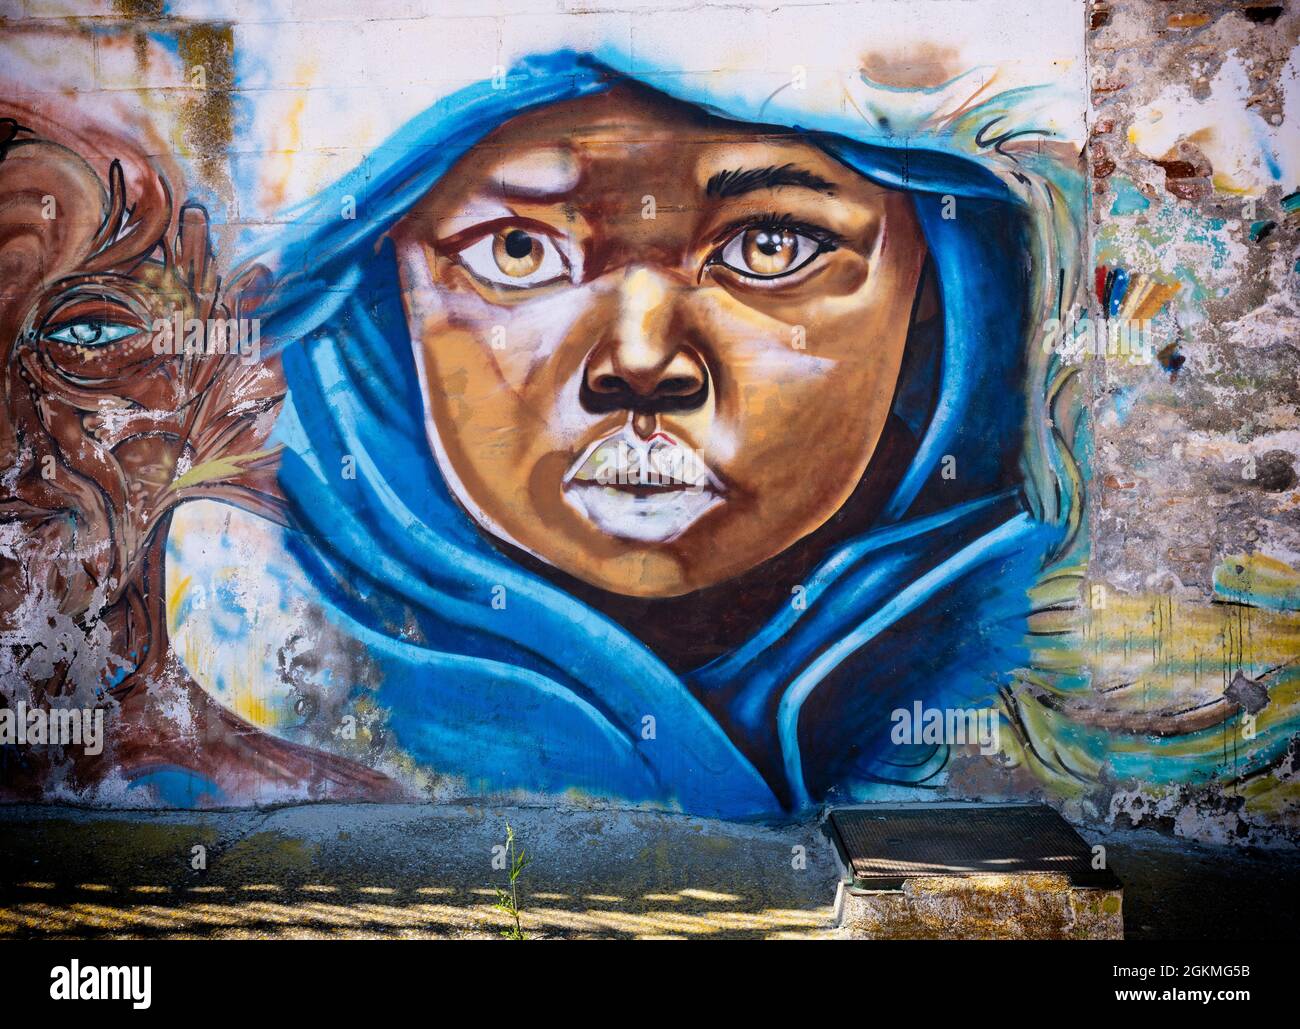 Wall art of a young black child in Nerja,  Malaga Province, Andalucia, Spain Stock Photo